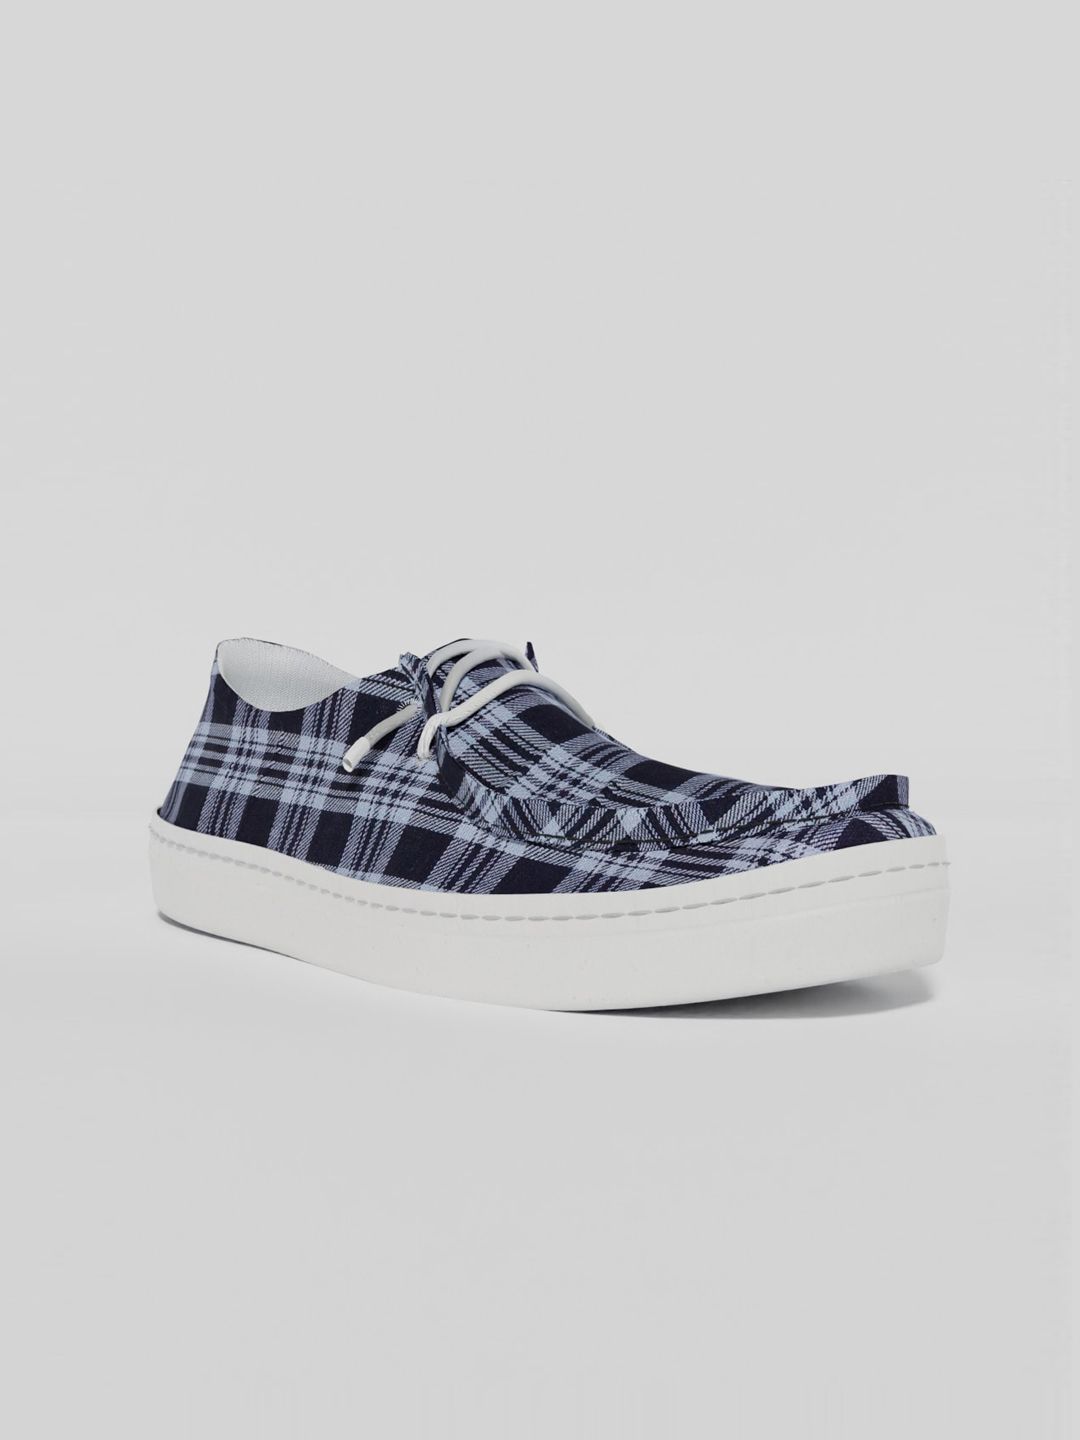 LOKAIT The Sneakers Company Women Printed Slip-On Sneakers Price in India